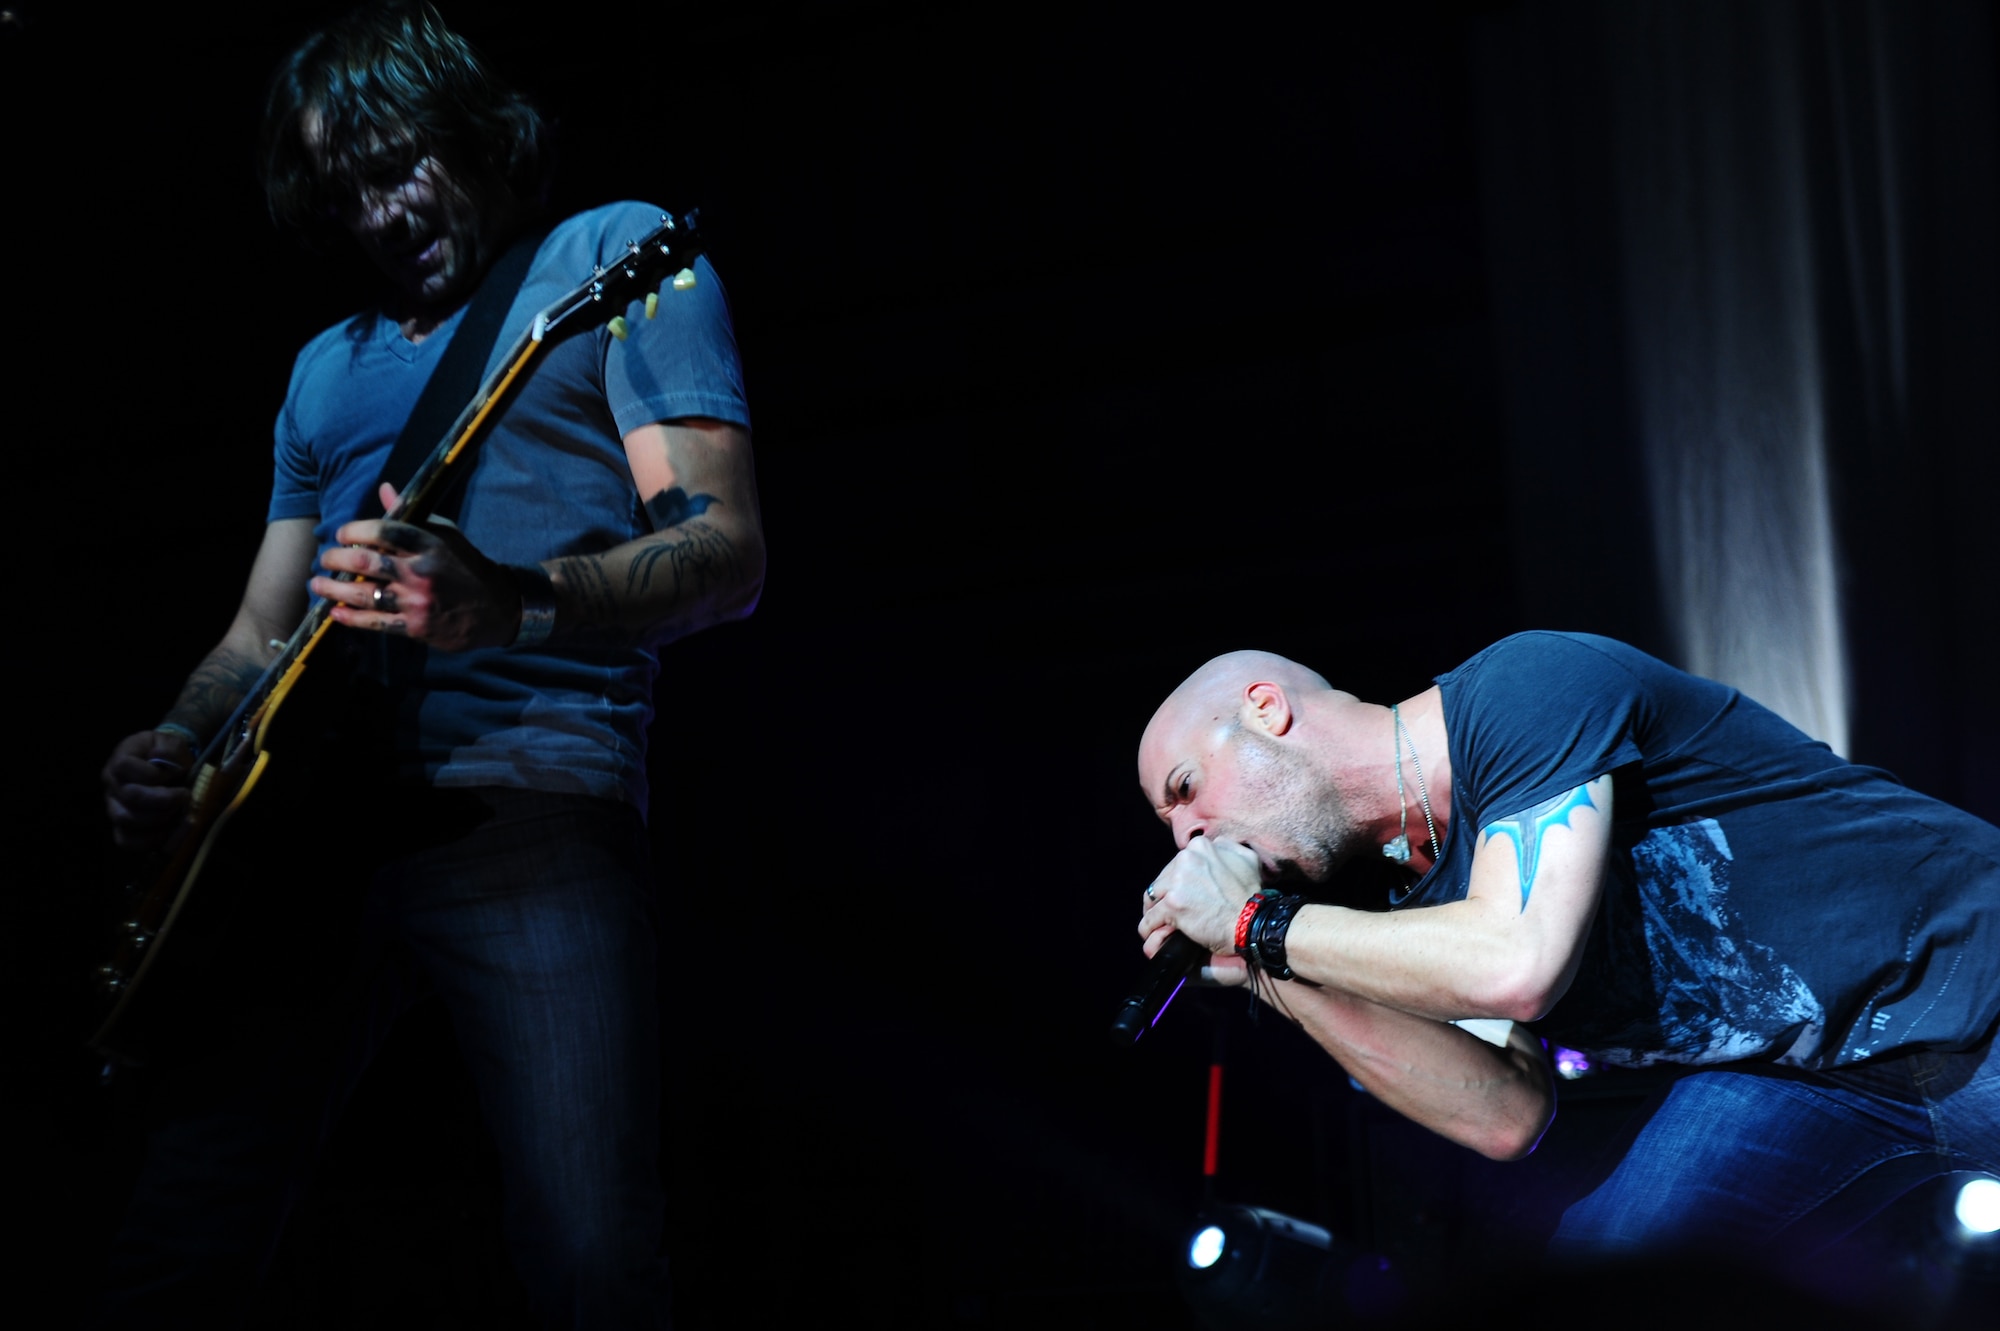 The rock band Daughtry performs during a concert for service members at Ramstein Air Base, Germany, Dec. 10, 2011. The performers are on a 13-day tour playing six concerts that will take them through Southwest Asia and Europe to bring entertainment to American troops and their families as part of the Operation Seasons Greetings - Tour for the Troops 2011. (U.S. Air Force photo by Airman Brea Miller)